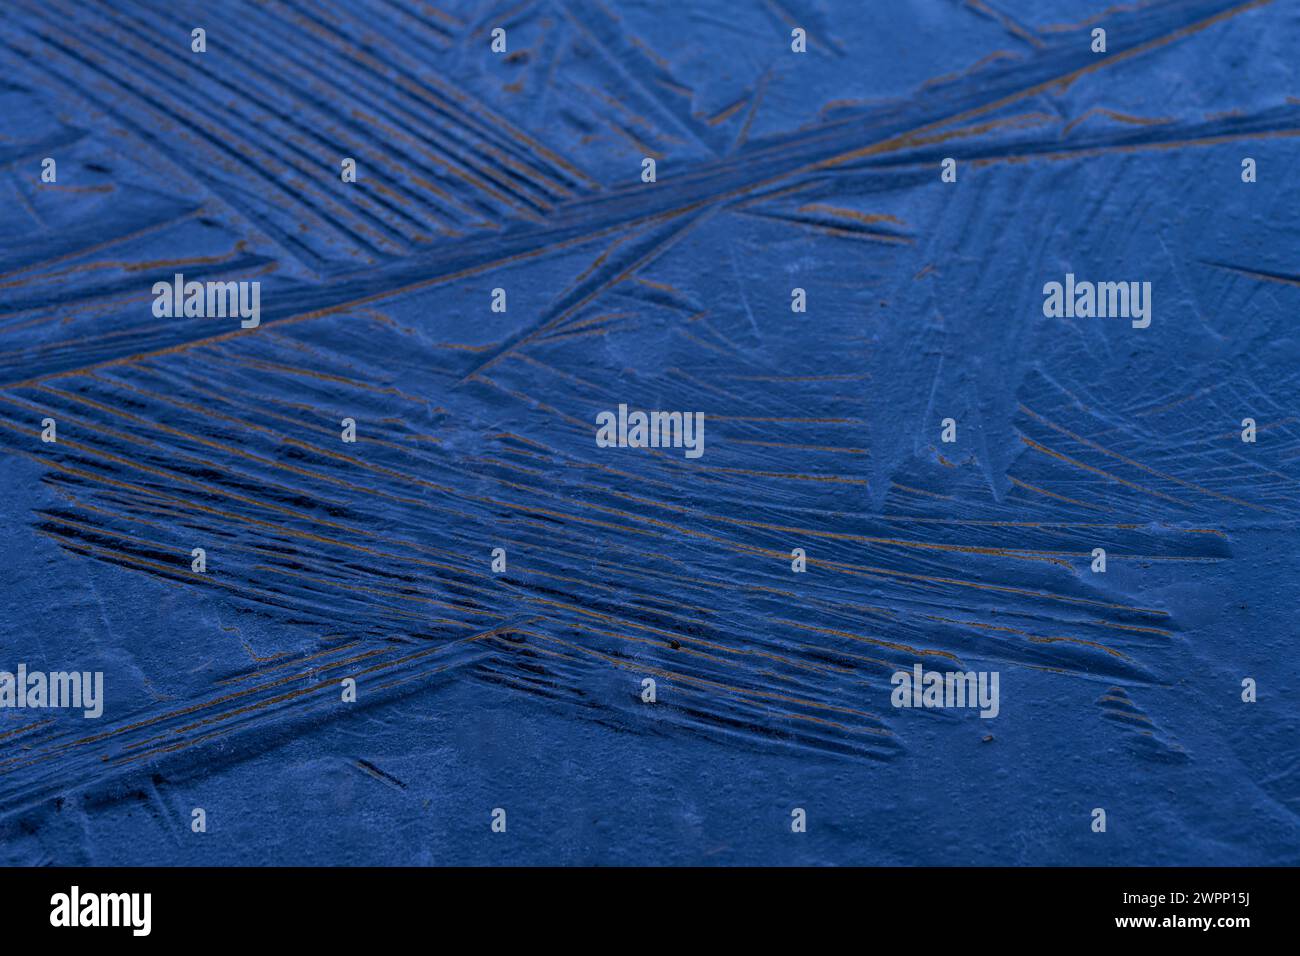 filigree patterns and structures in the ice on a frozen lake, close-up, Germany Stock Photo